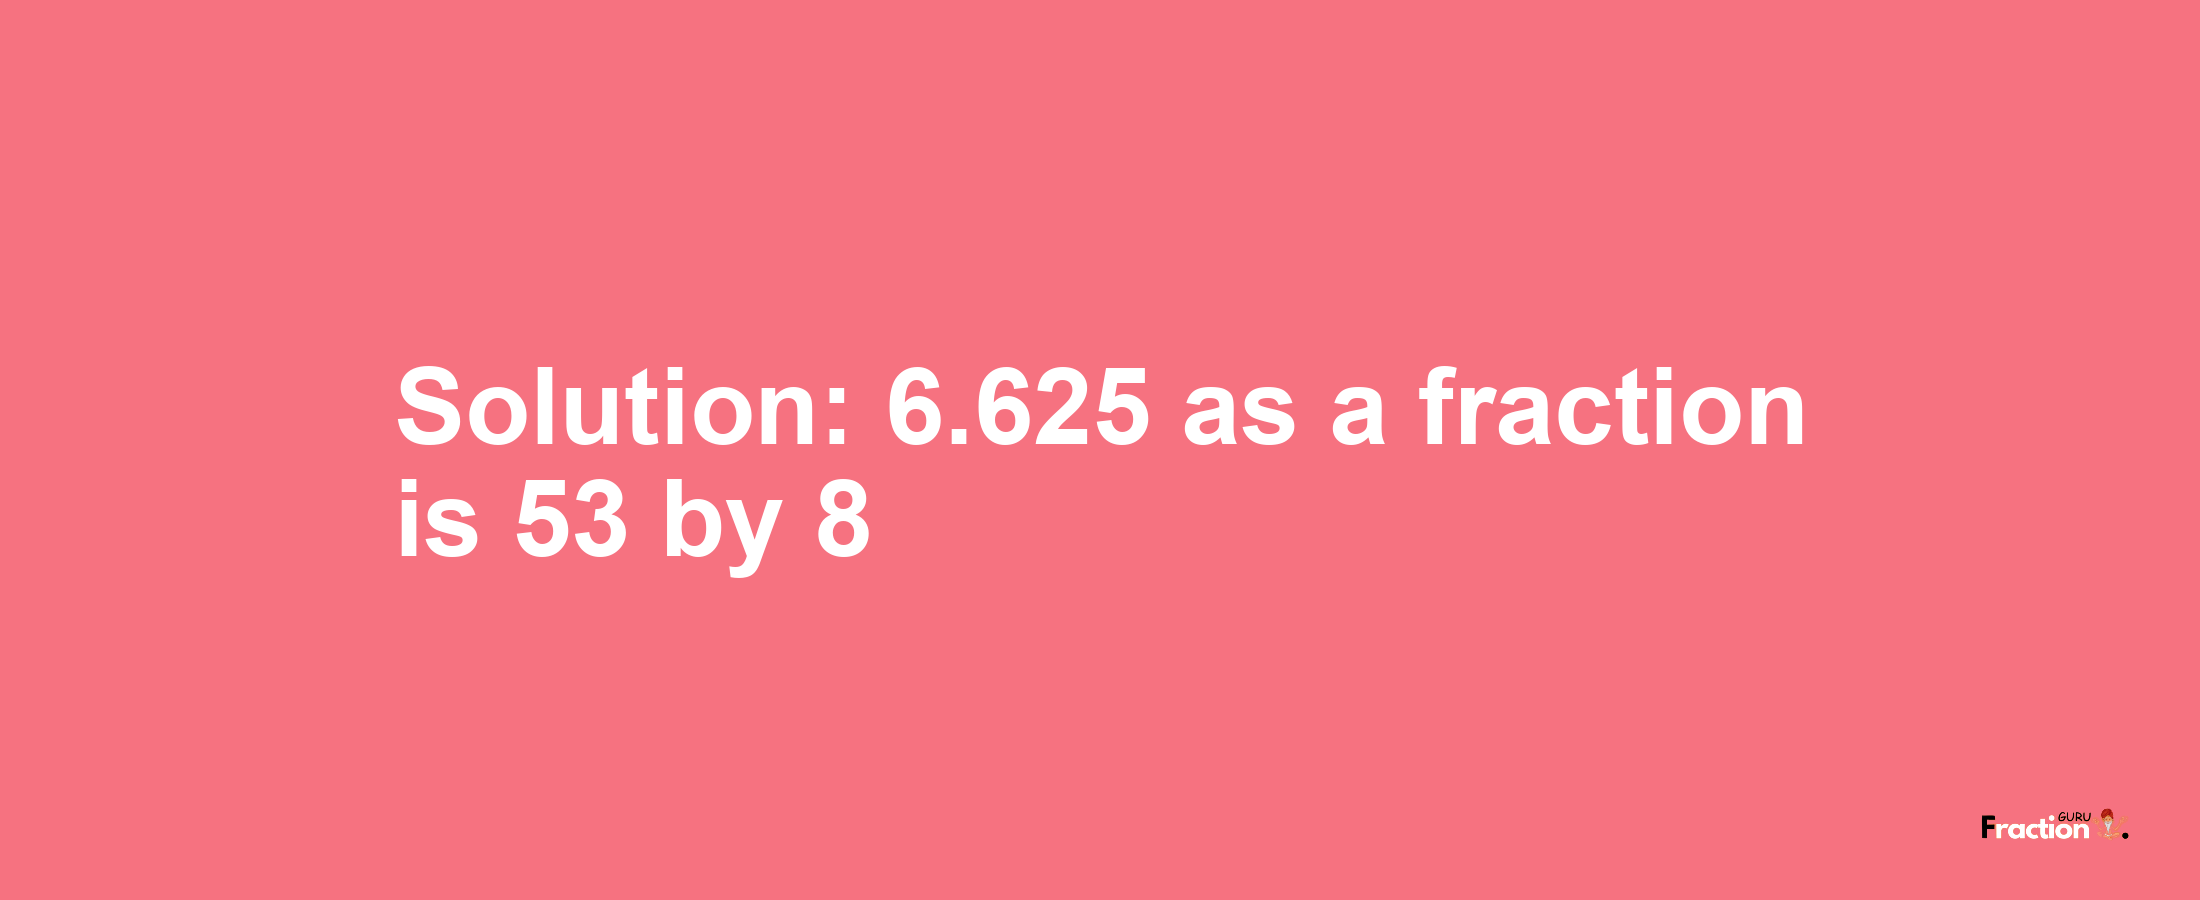 Solution:6.625 as a fraction is 53/8